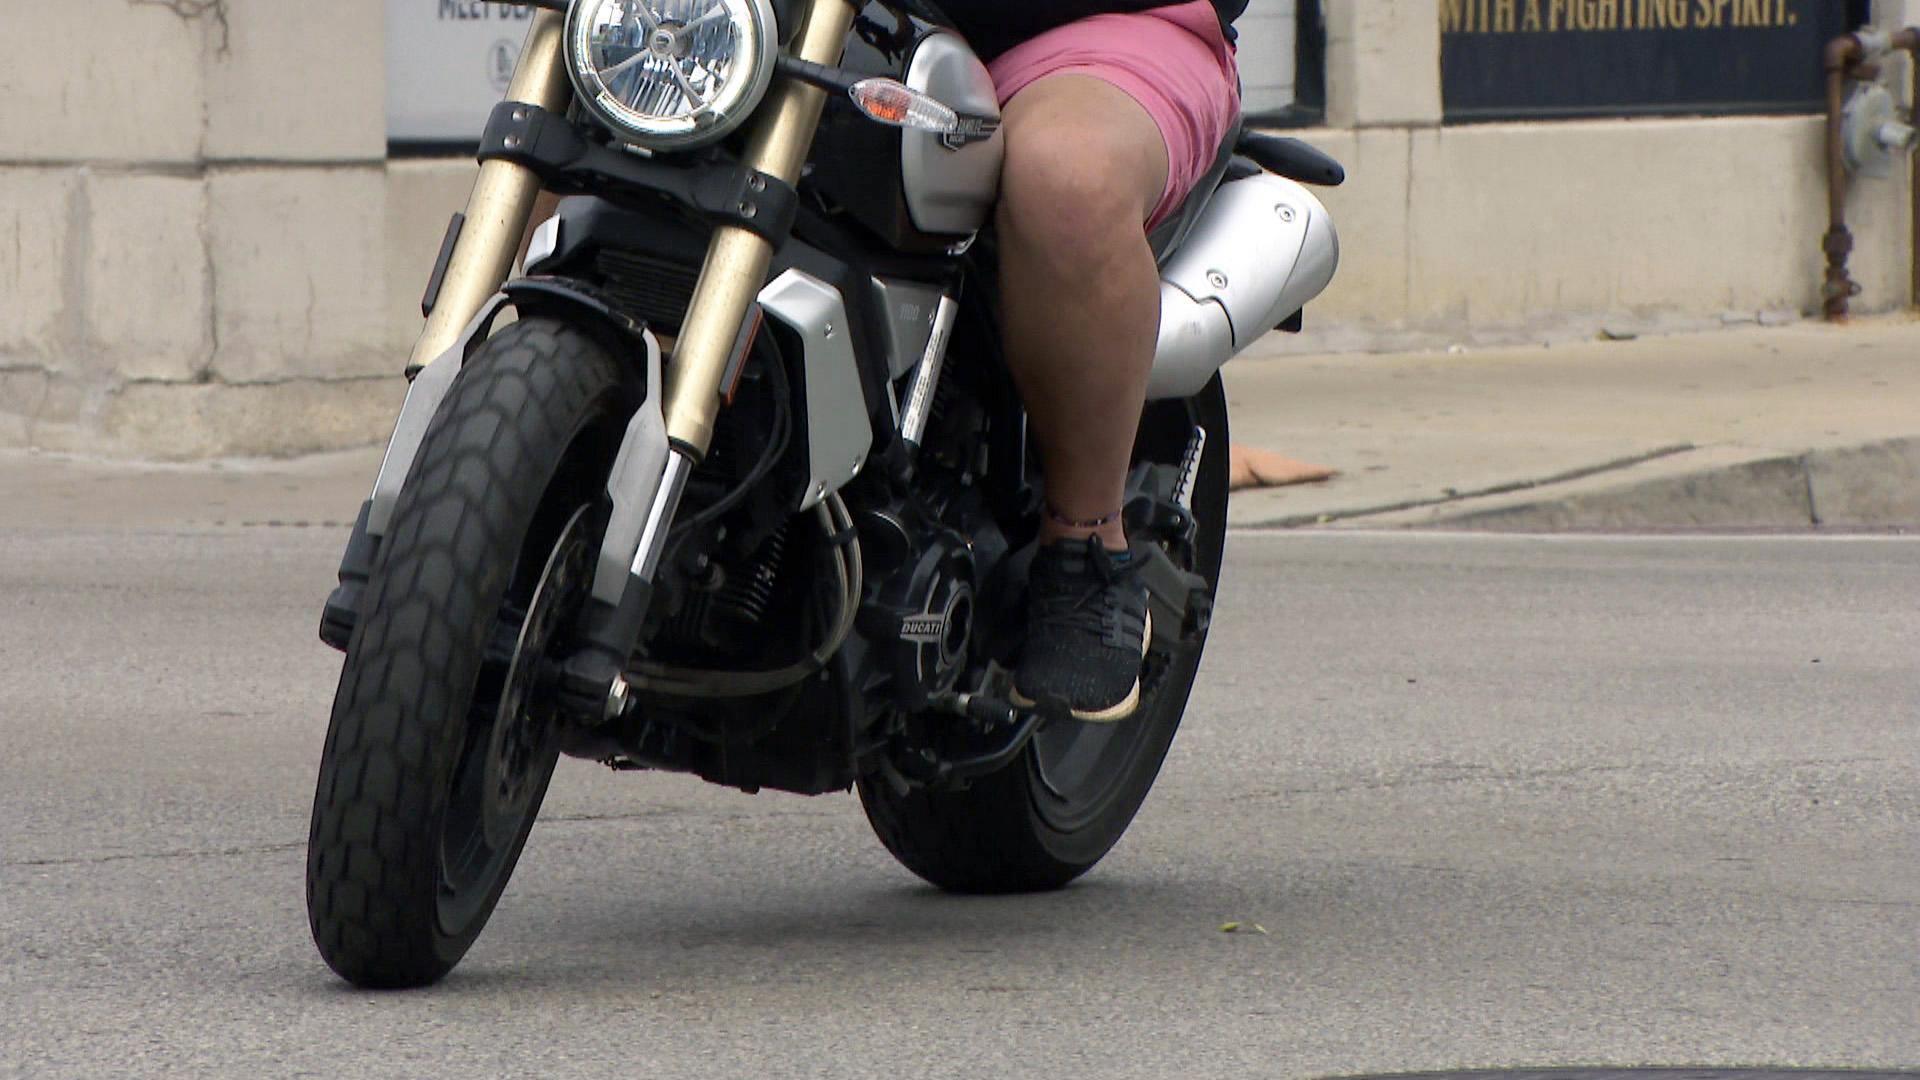 A person rides a motorcycle in Chicago. (WTTW News)